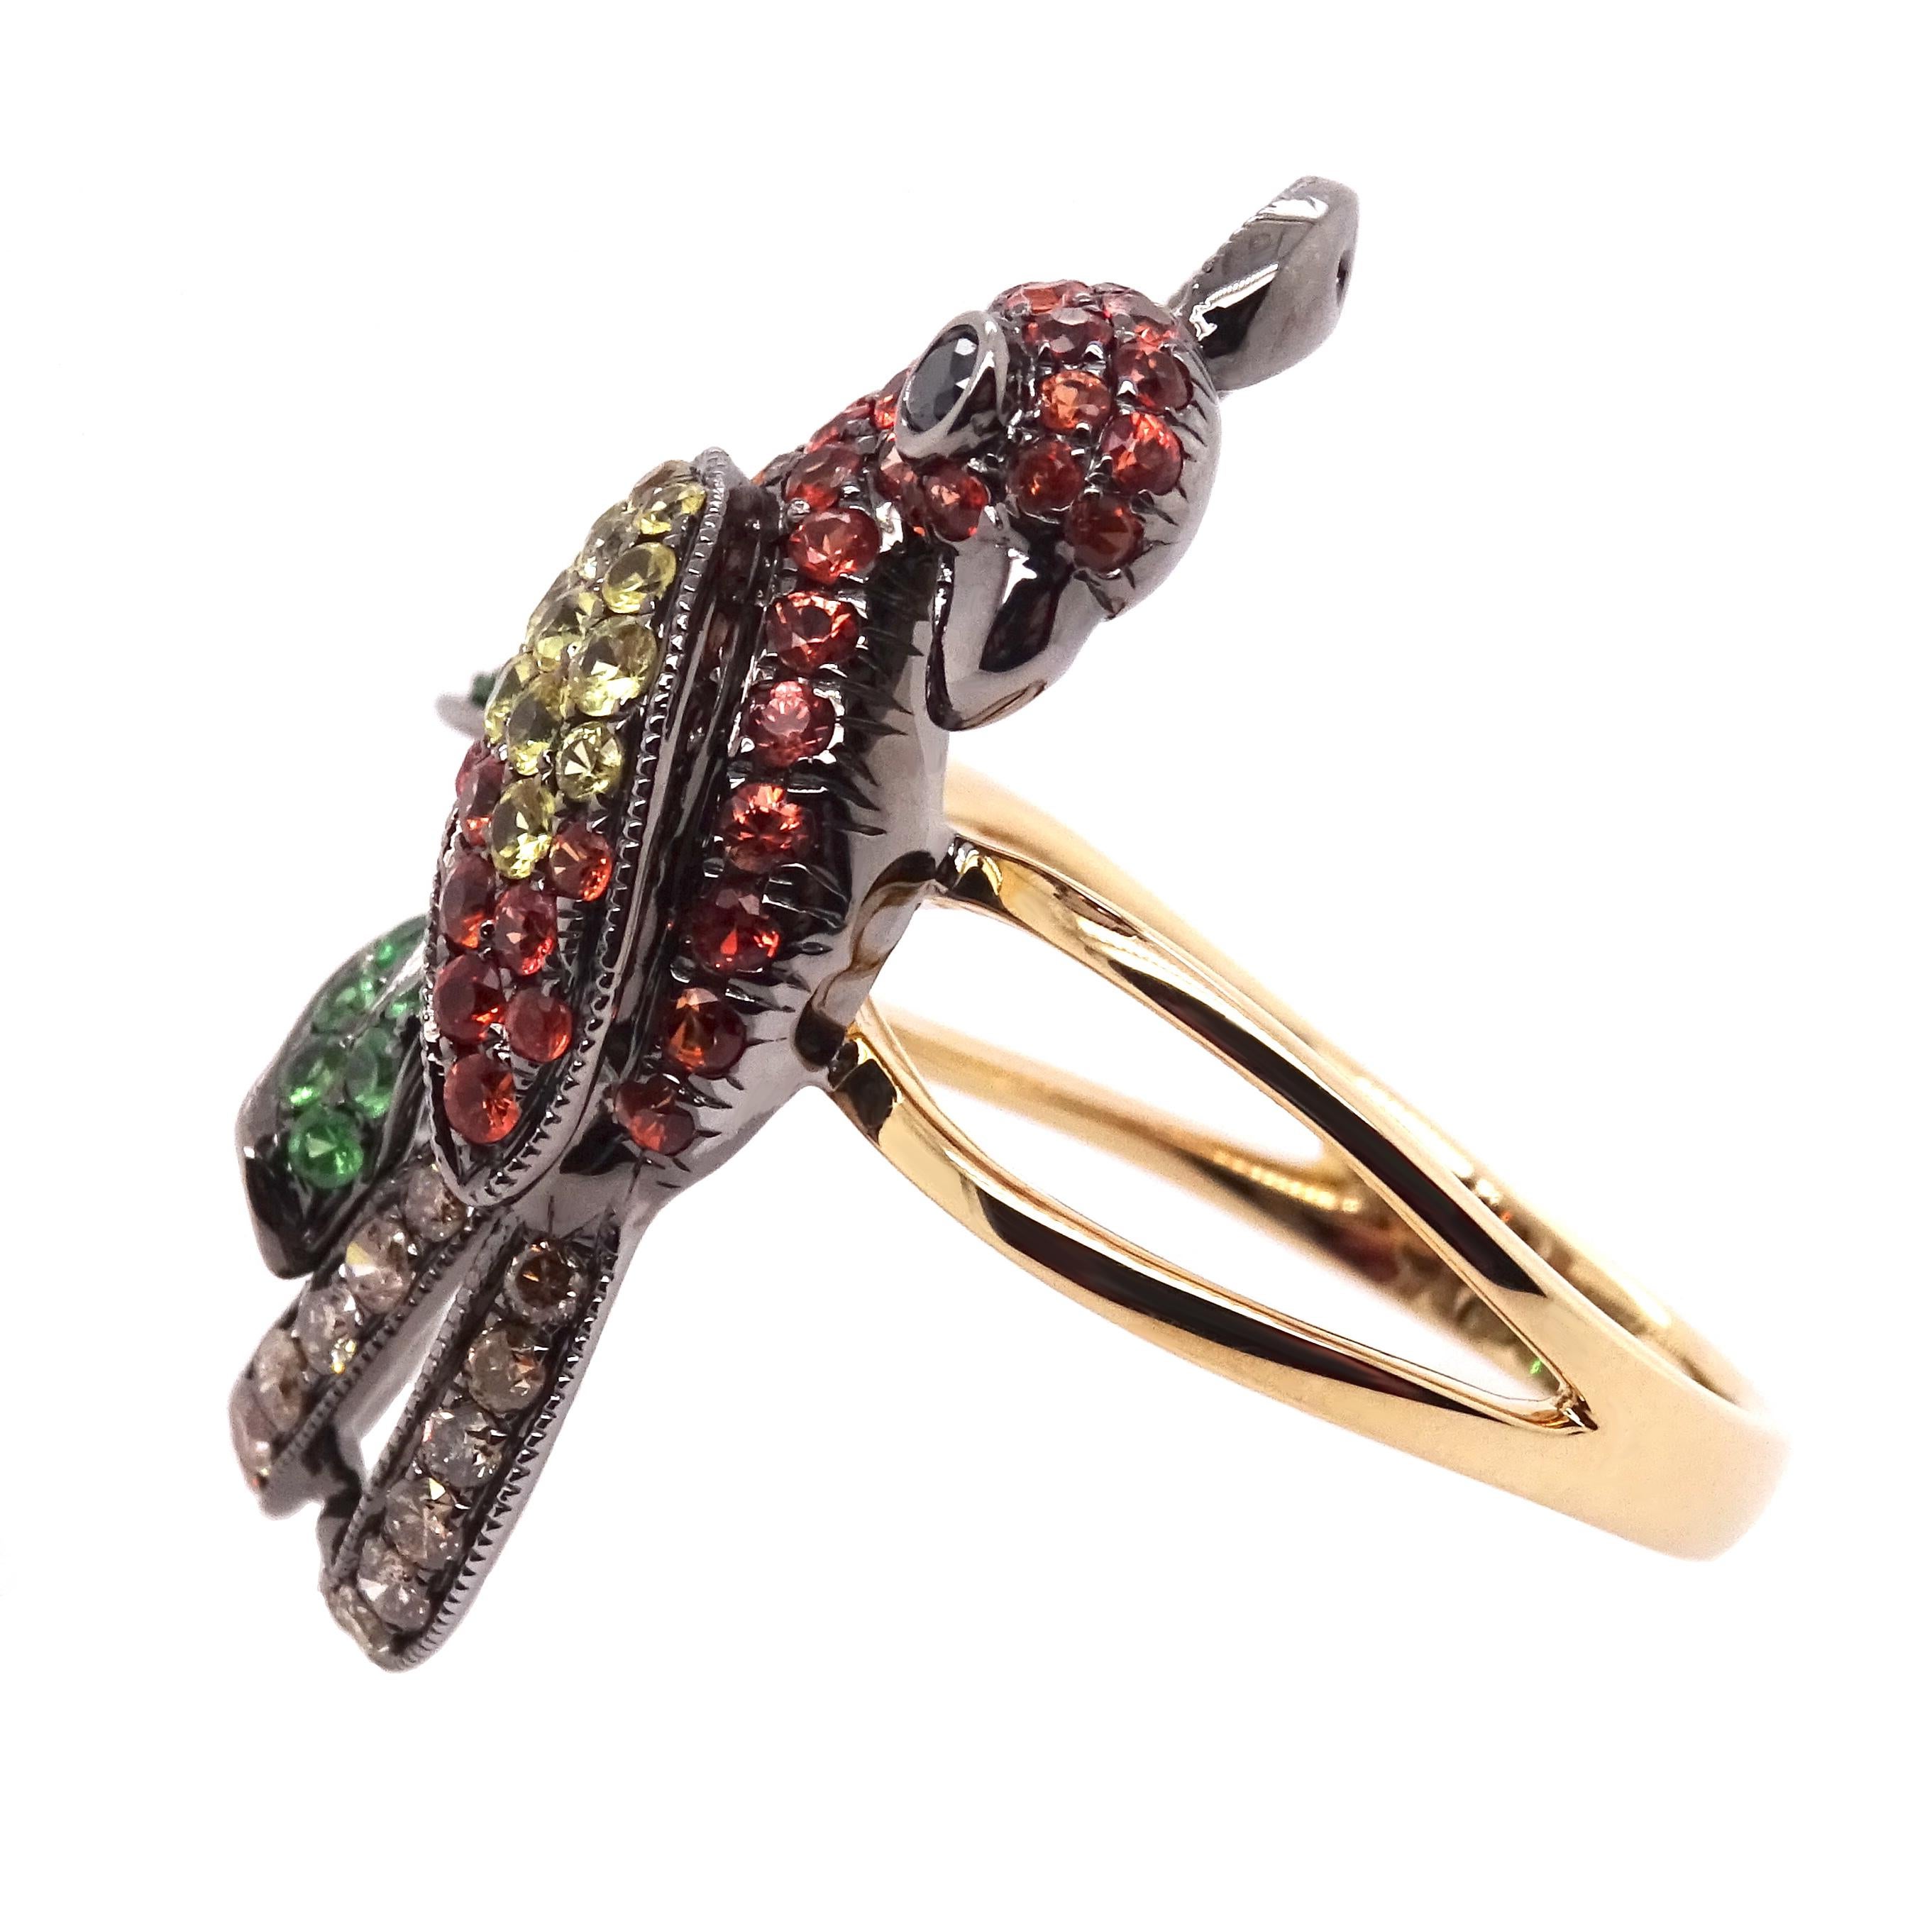 Behold this ravishing parrot ring, a dazzling piece that brings out the inner jungle adventurer in you! Crafted with love from 14K yellow gold, this playful parrot design is adorned with a vibrant plumage of diamonds, garnets, and sapphires,